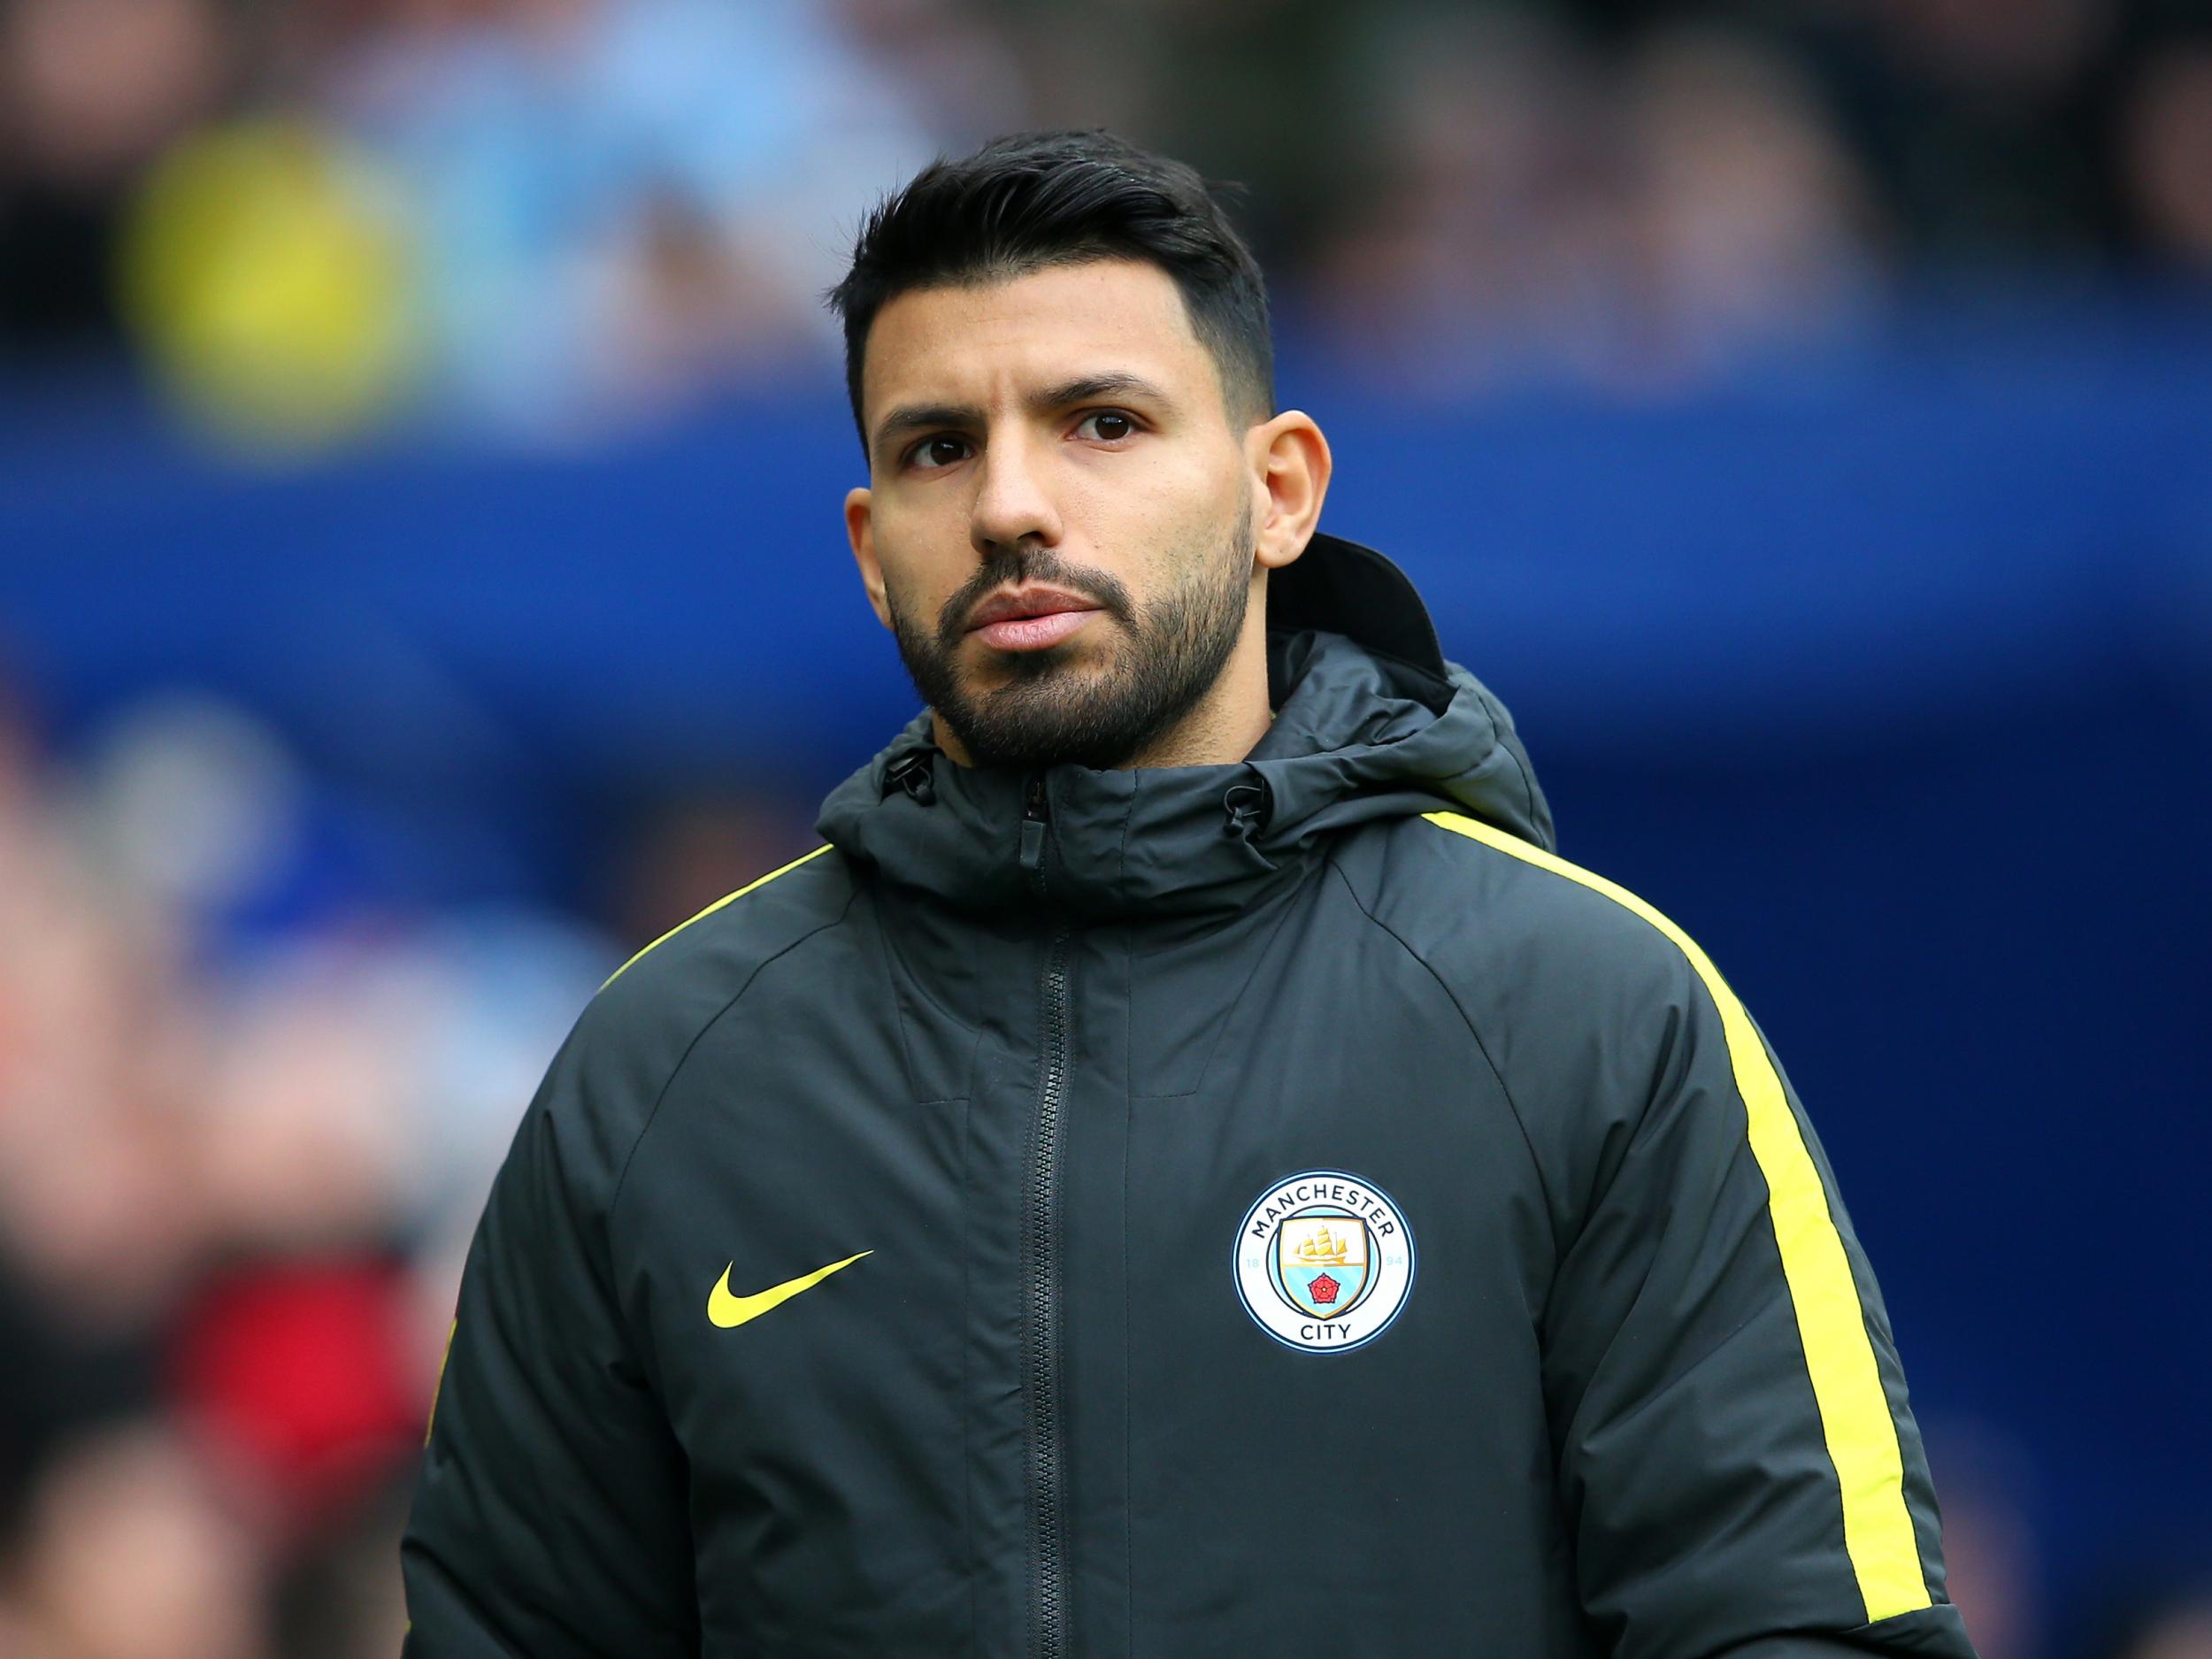 Aguero is staying put for now